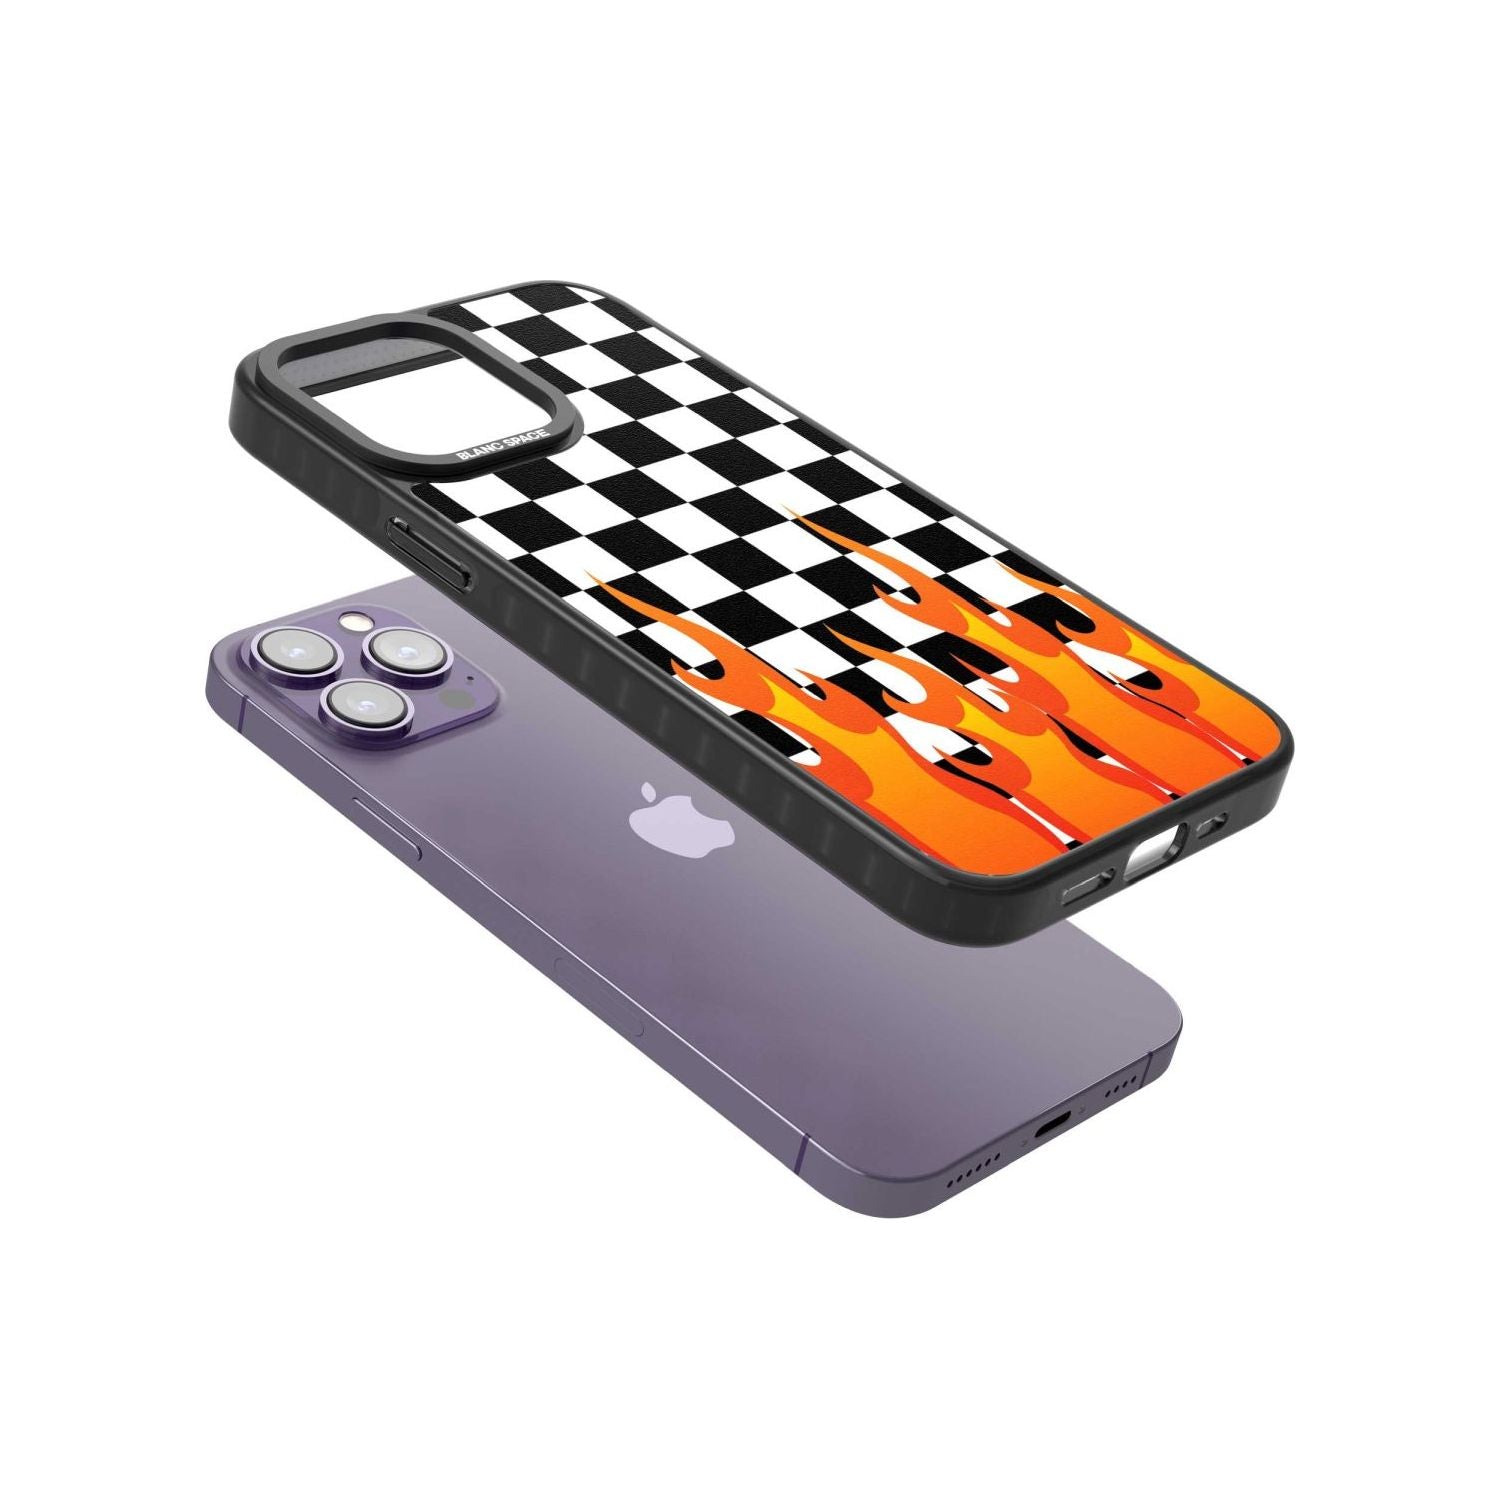 Checkered Fire Phone Case iPhone 15 Pro Max / Black Impact Case,iPhone 15 Plus / Black Impact Case,iPhone 15 Pro / Black Impact Case,iPhone 15 / Black Impact Case,iPhone 15 Pro Max / Impact Case,iPhone 15 Plus / Impact Case,iPhone 15 Pro / Impact Case,iPhone 15 / Impact Case,iPhone 15 Pro Max / Magsafe Black Impact Case,iPhone 15 Plus / Magsafe Black Impact Case,iPhone 15 Pro / Magsafe Black Impact Case,iPhone 15 / Magsafe Black Impact Case,iPhone 14 Pro Max / Black Impact Case,iPhone 14 Plus / Black Impact